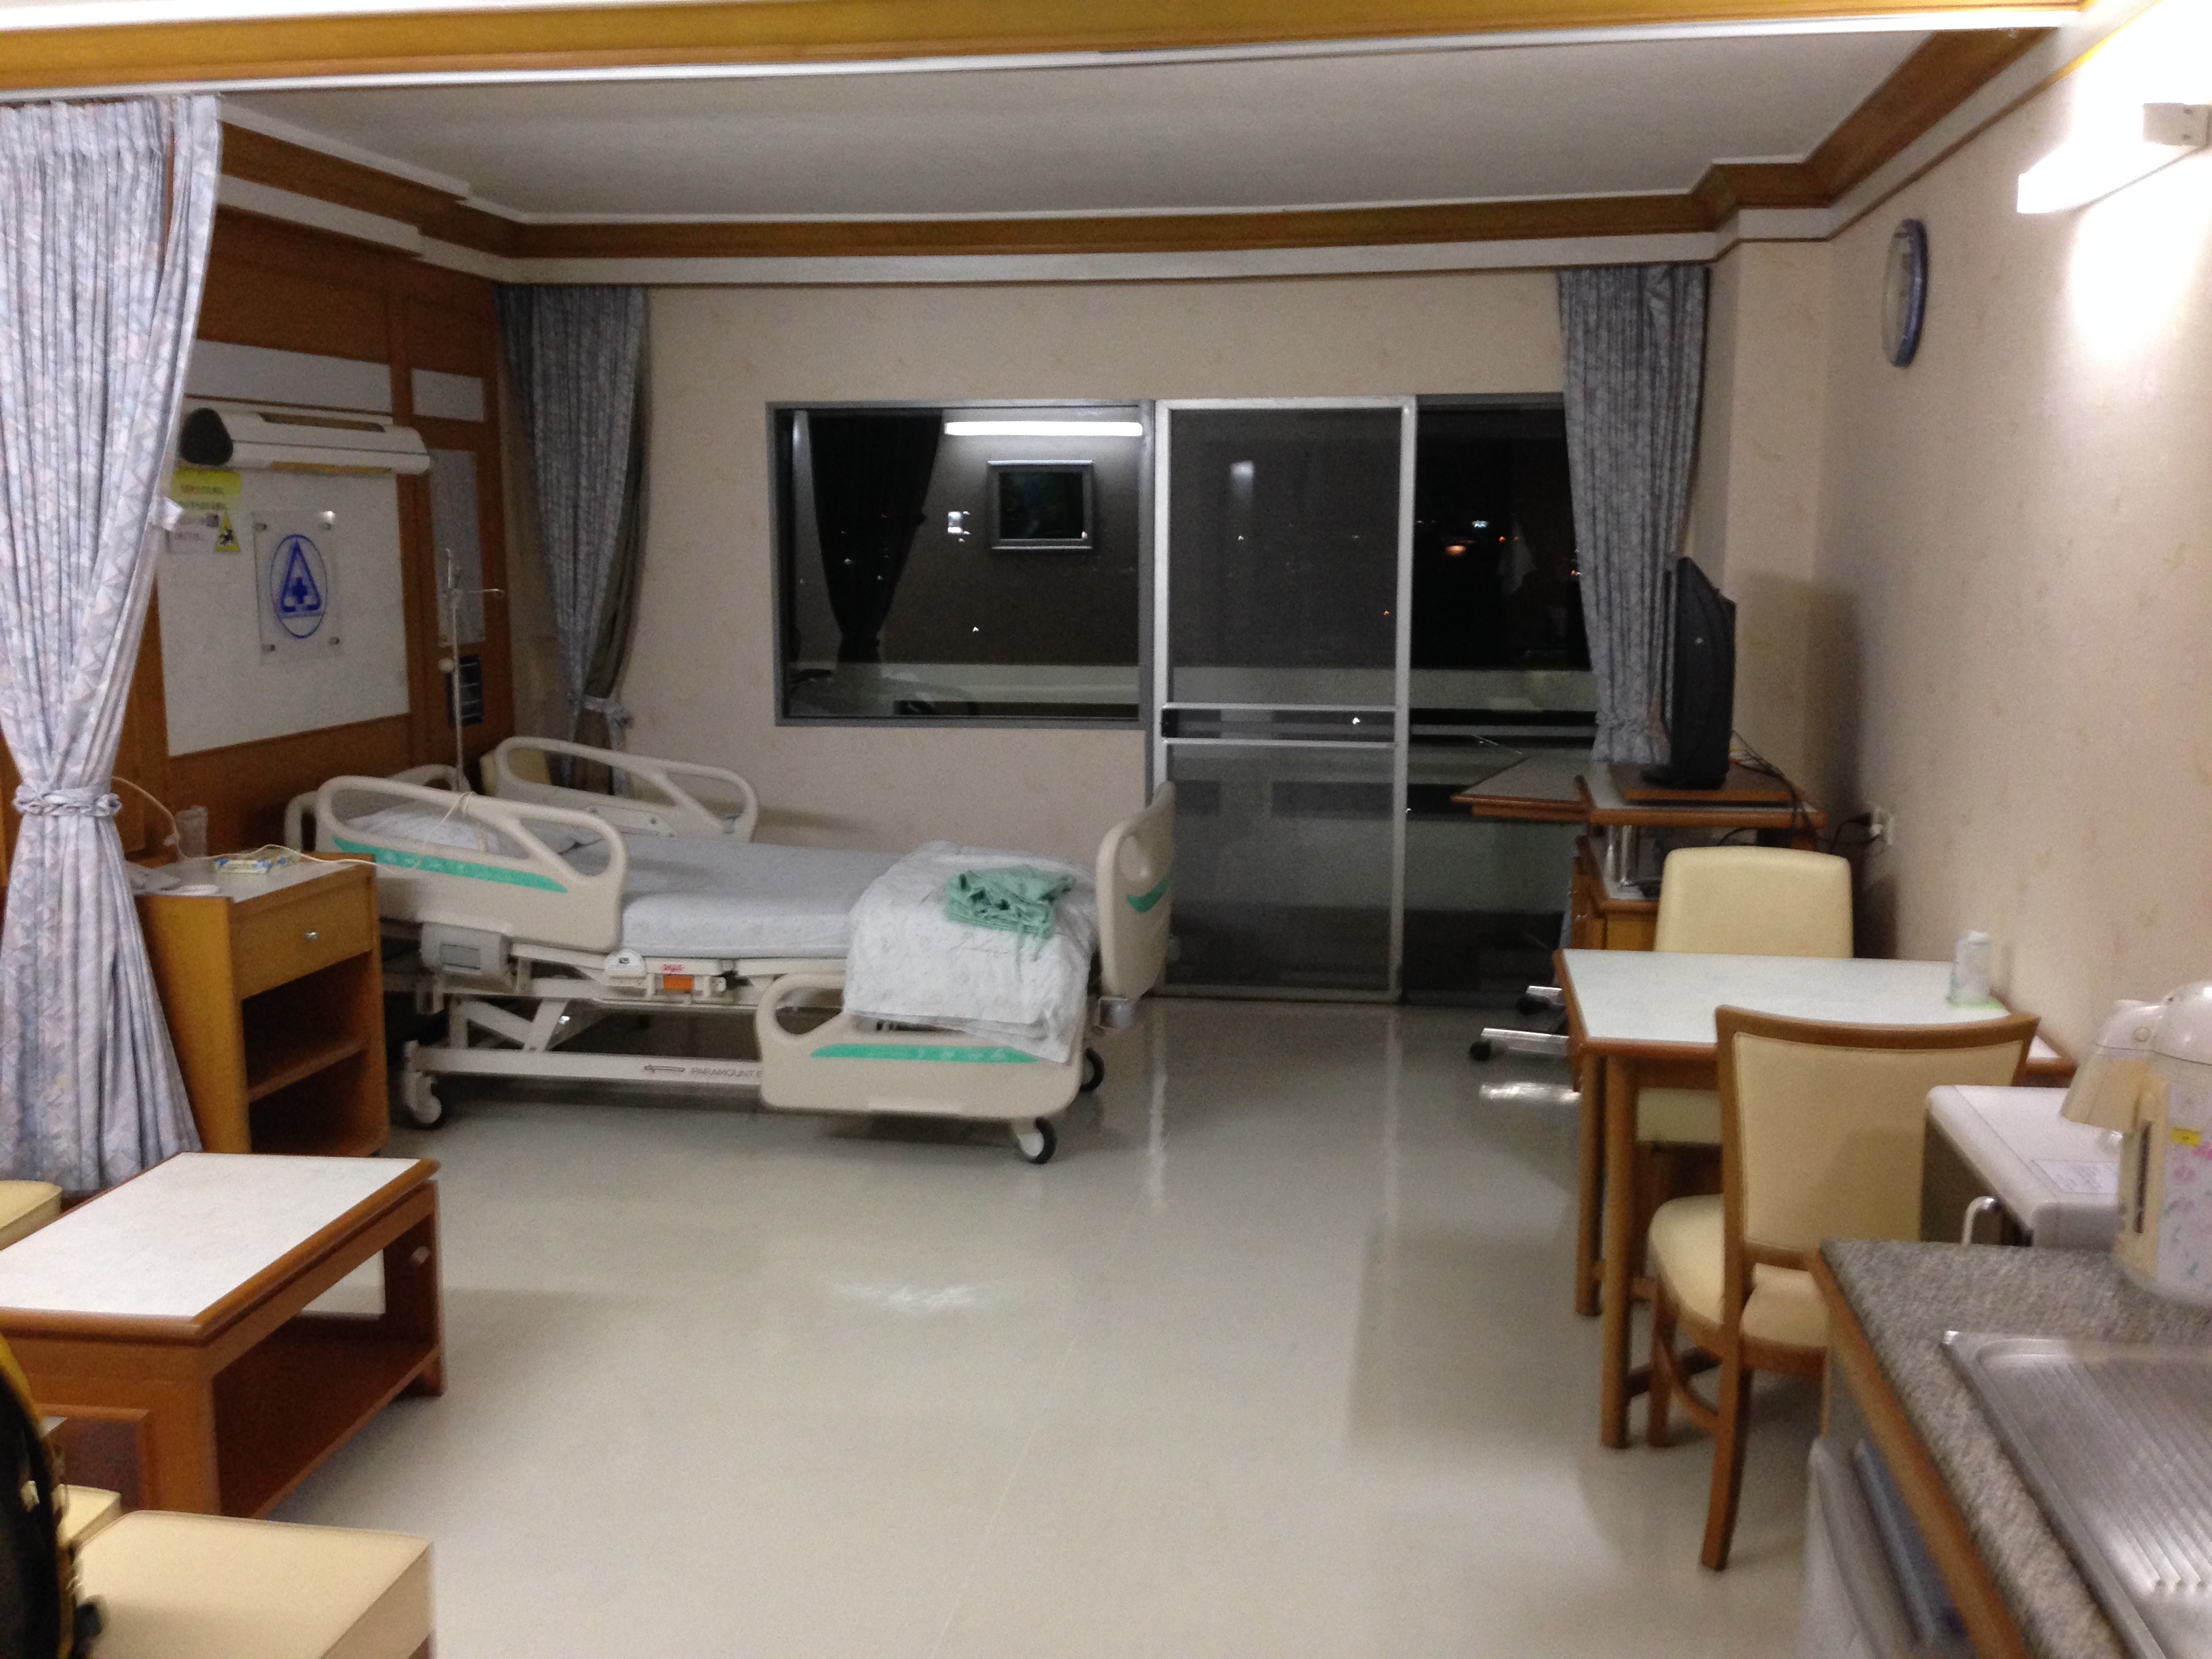 private hospital room at night